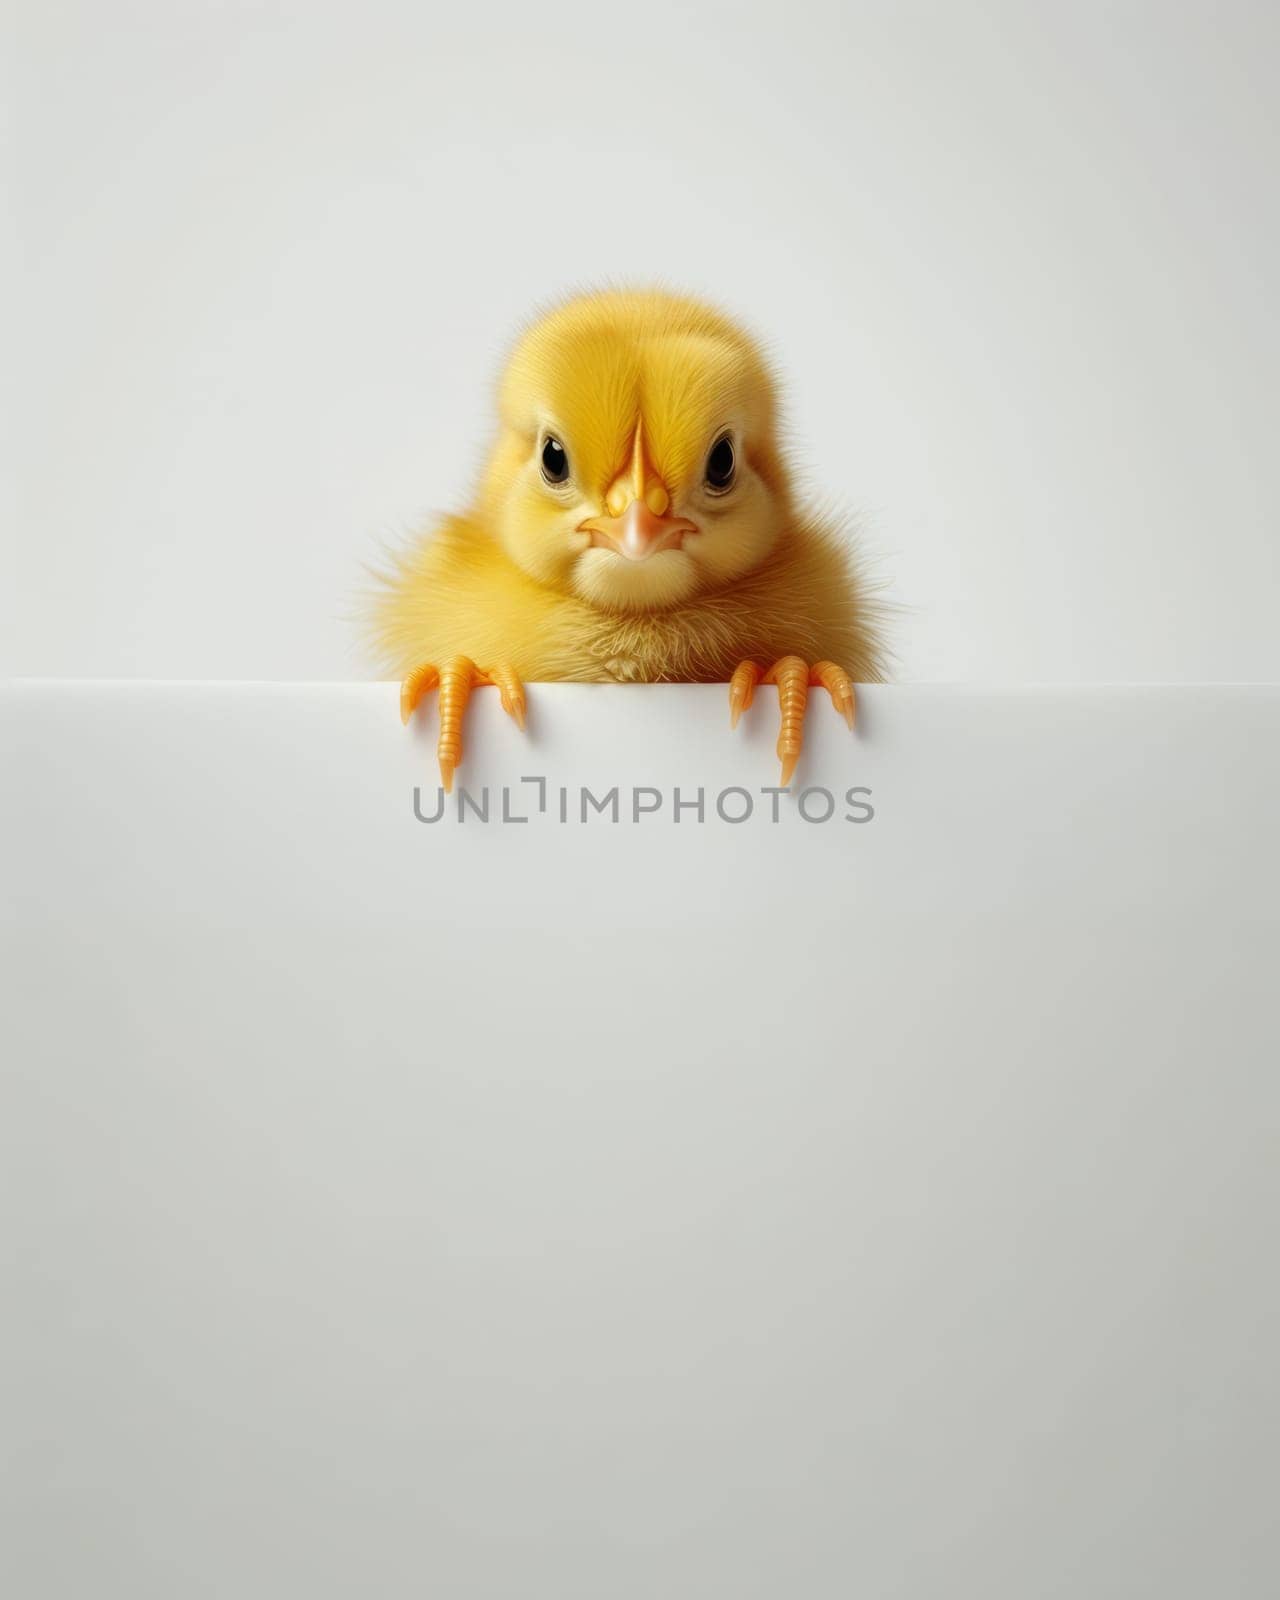 Cute Fluffy Yellow Chick on White Background. Easter Concept. Ai generated